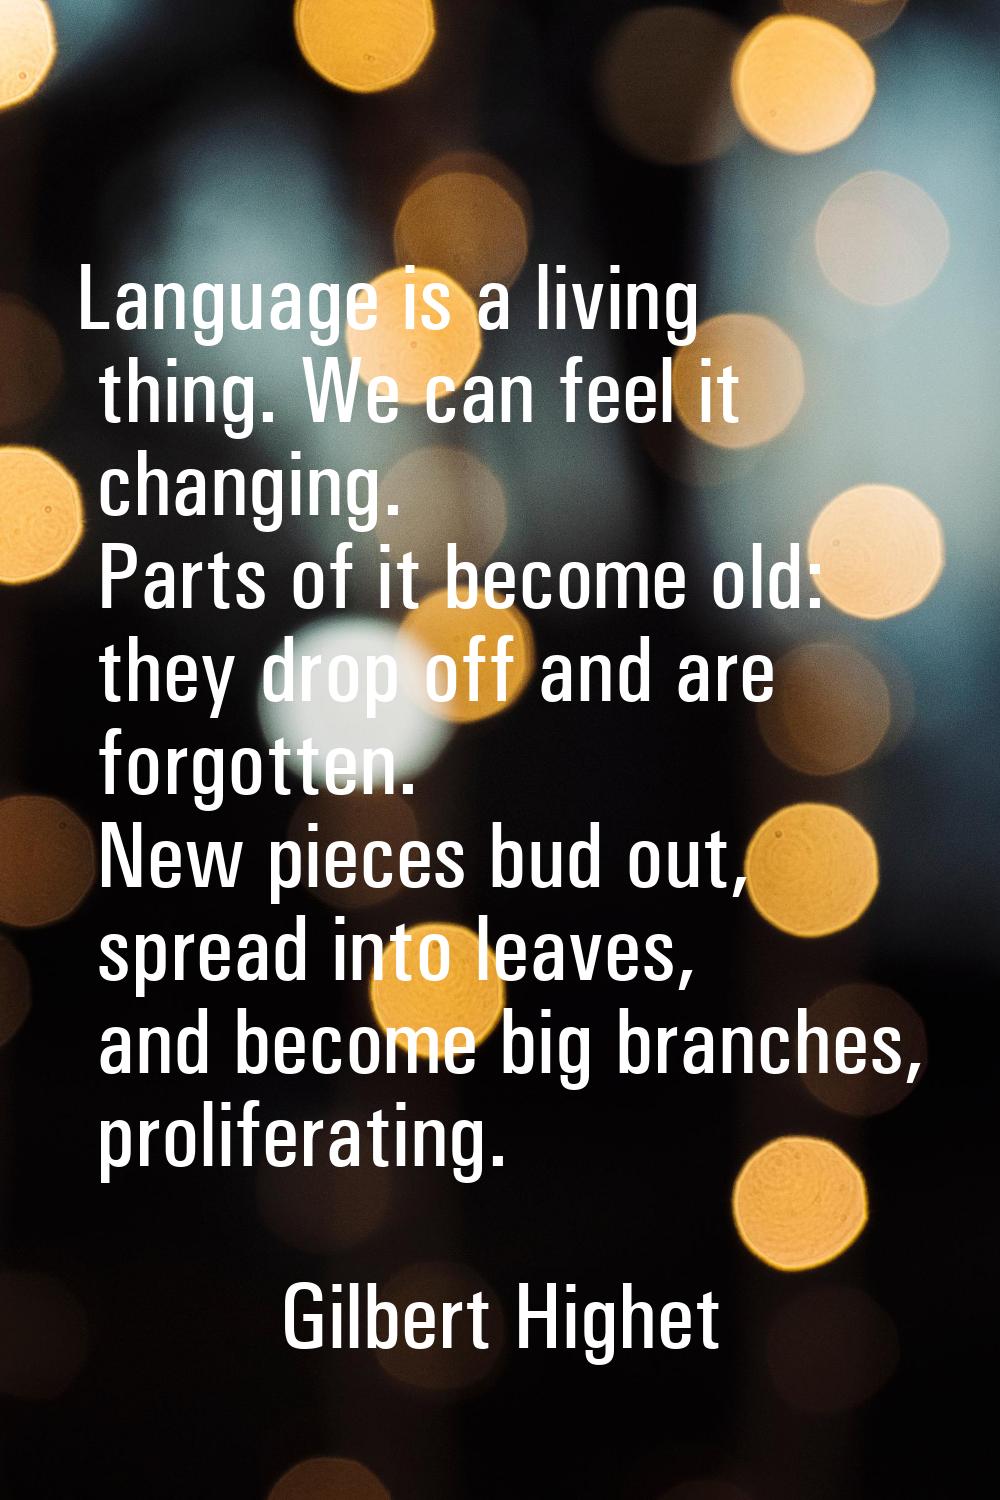 Language is a living thing. We can feel it changing. Parts of it become old: they drop off and are 